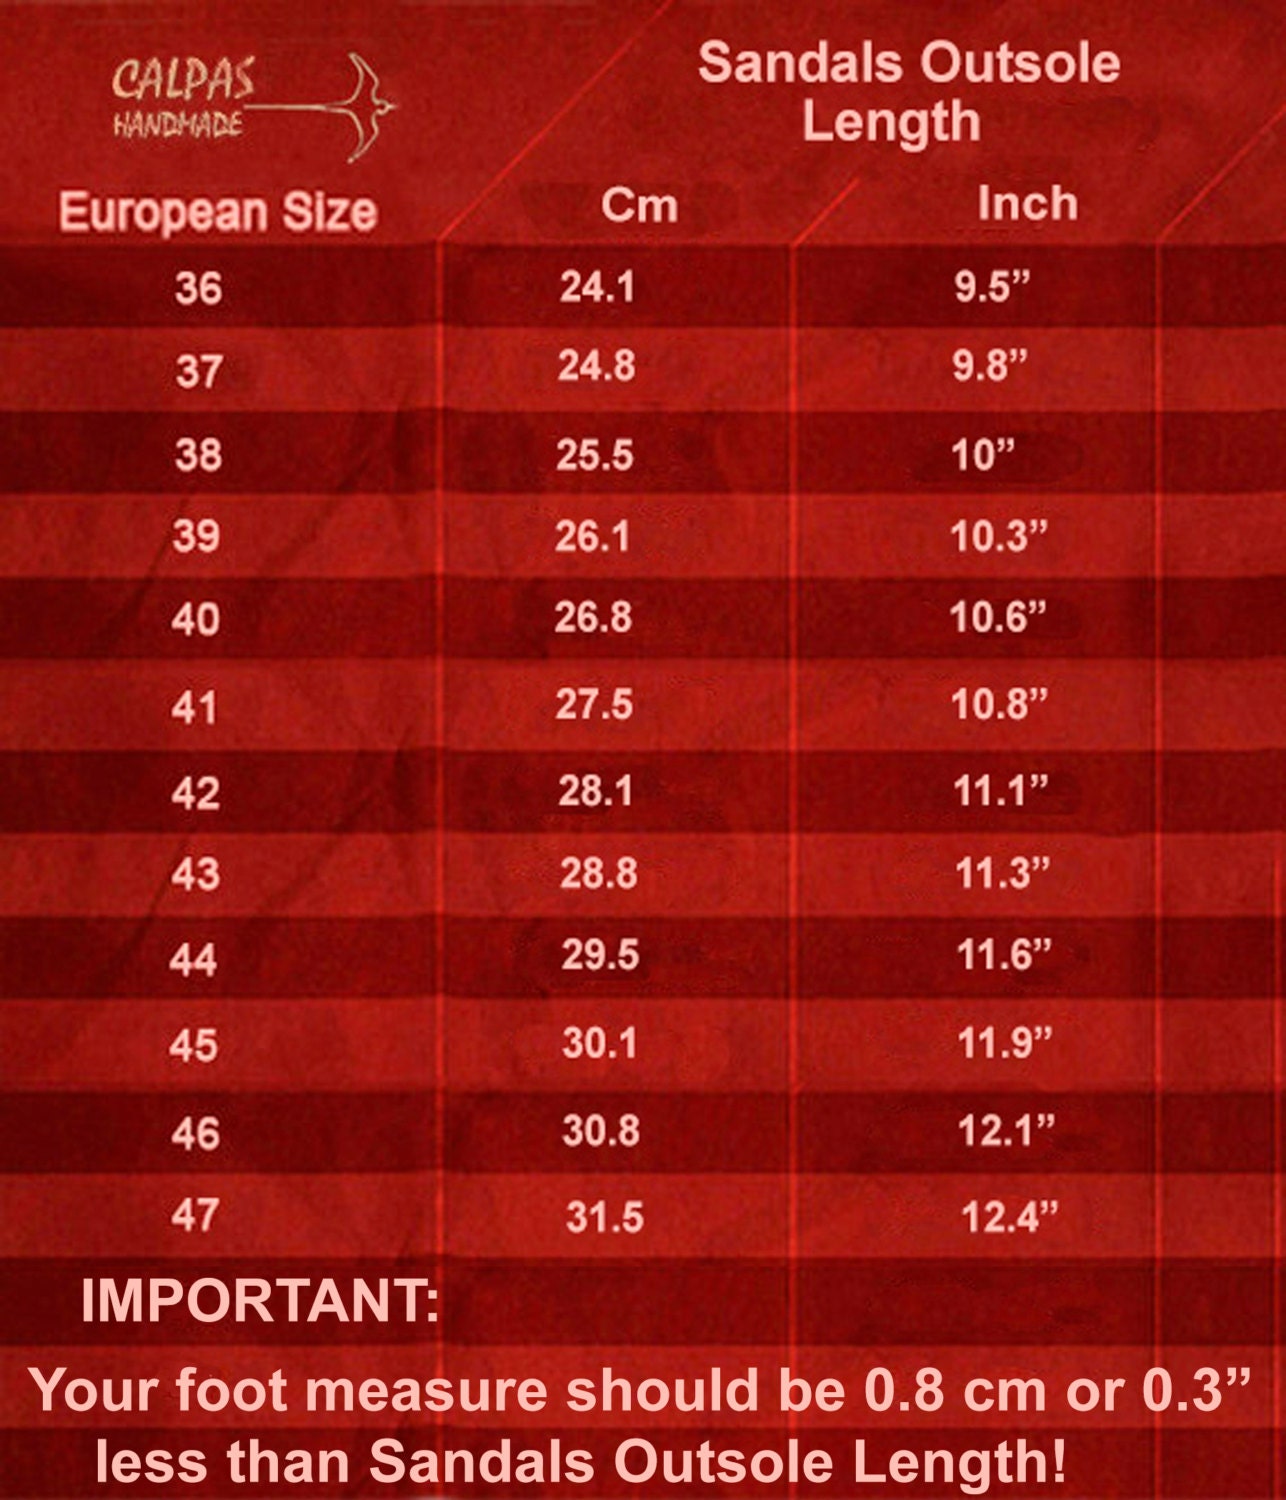 Shoe Size Chart How To Measure Your Feet by Calpas on Etsy